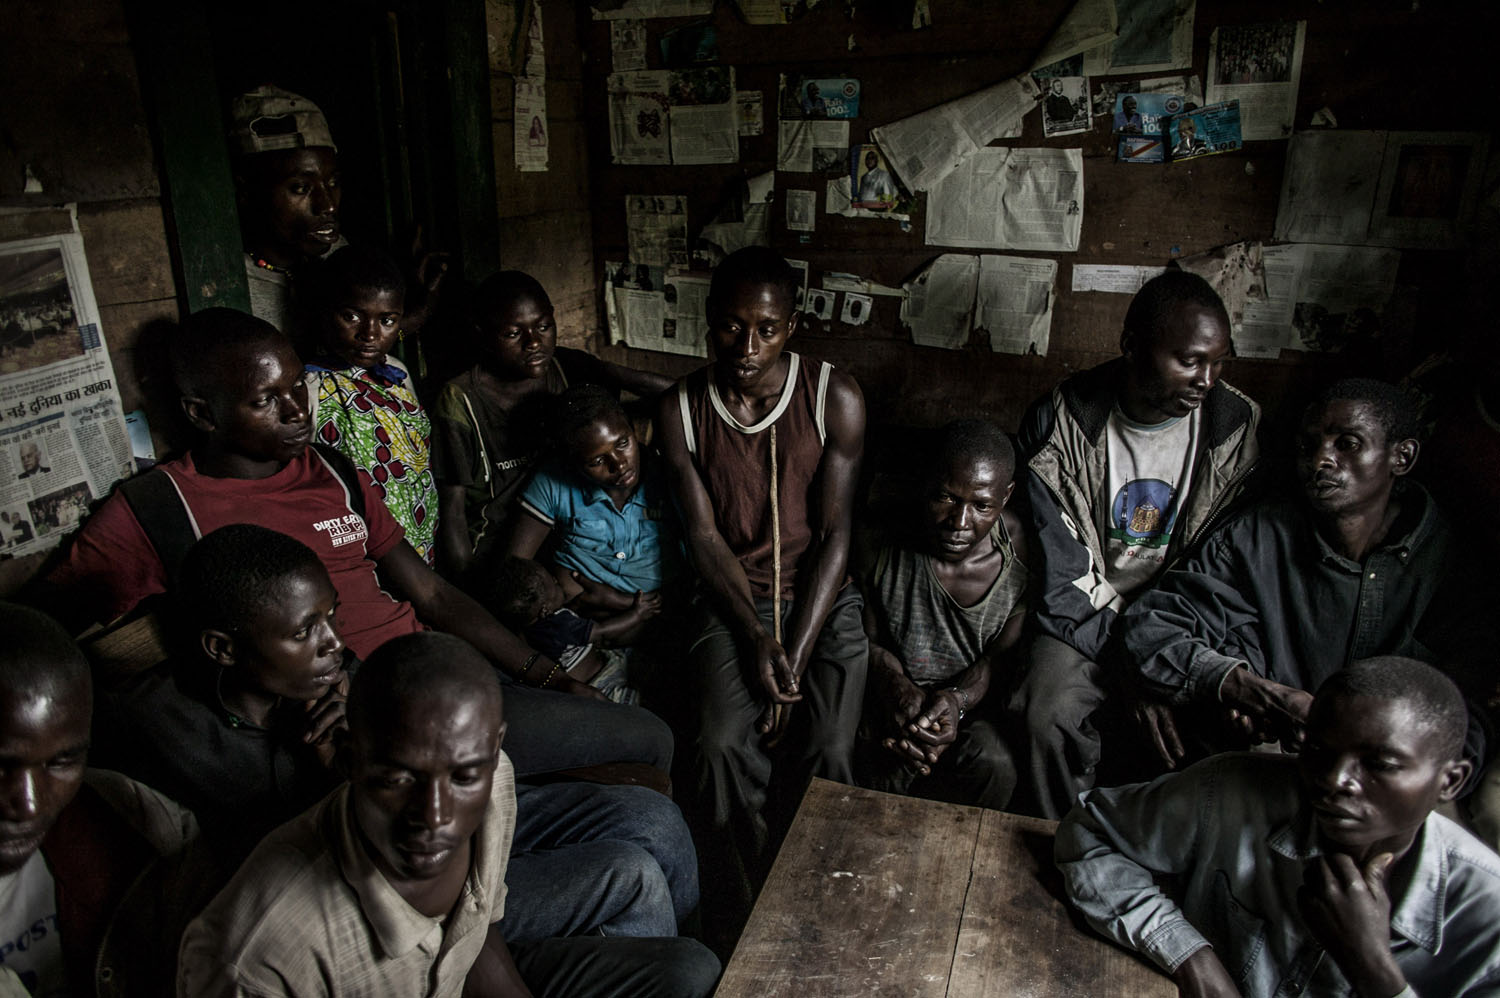  The men of the Kanyabugoyi family gather inside their family home in the village of Rugare, which was recently wrest from M-23 rebels by the Congolese army. The family fled their home in August after being continually harassed by M-23 rebels. When t